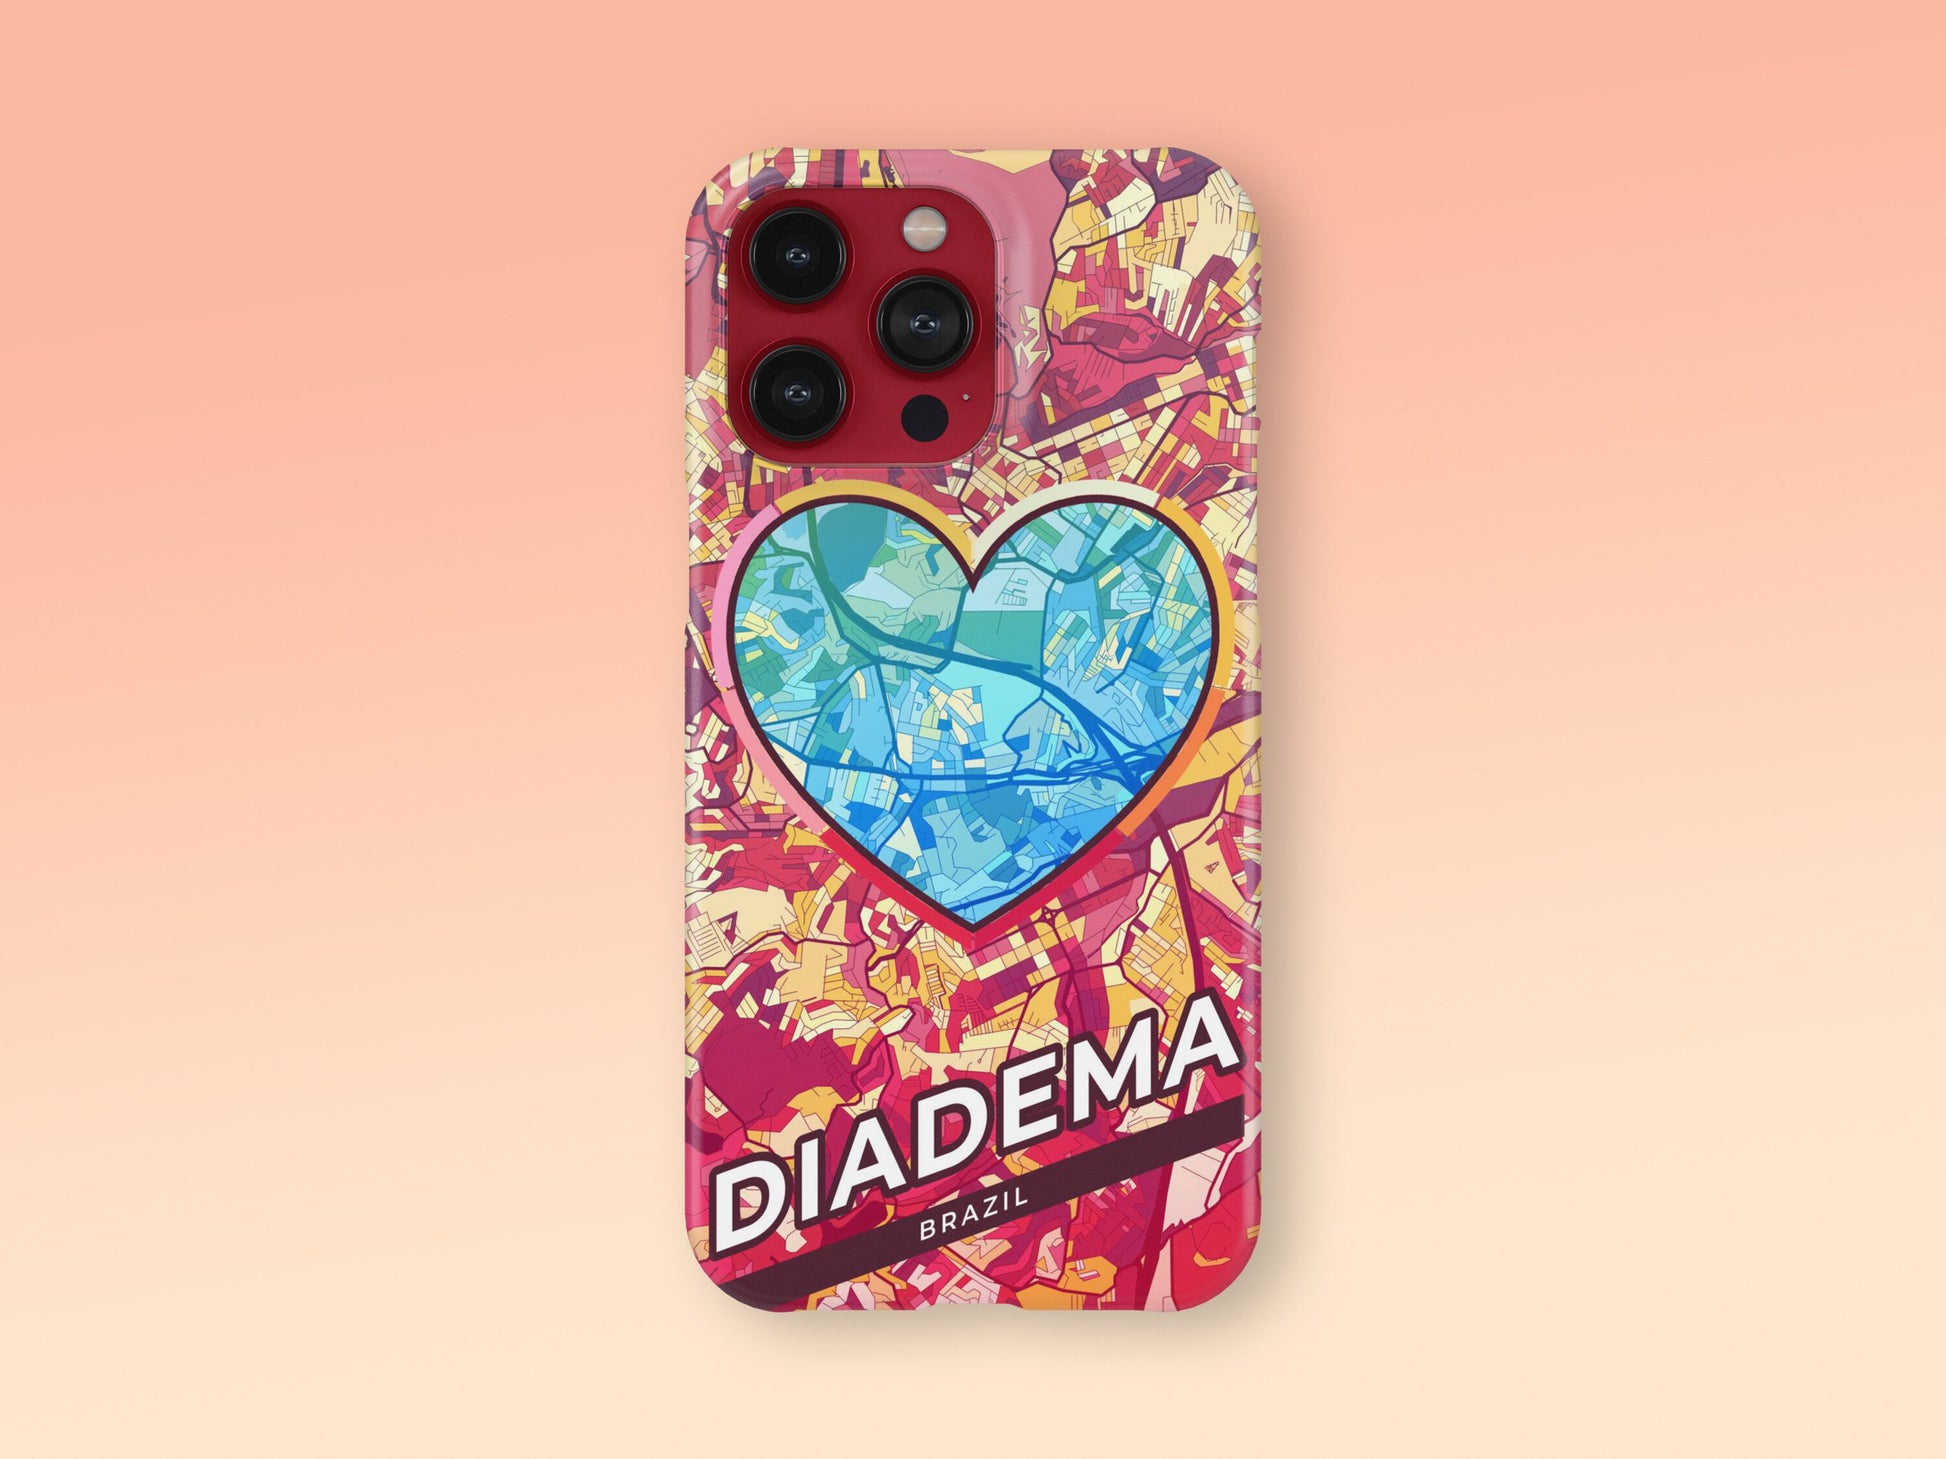 Diadema Brazil slim phone case with colorful icon. Birthday, wedding or housewarming gift. Couple match cases. 2